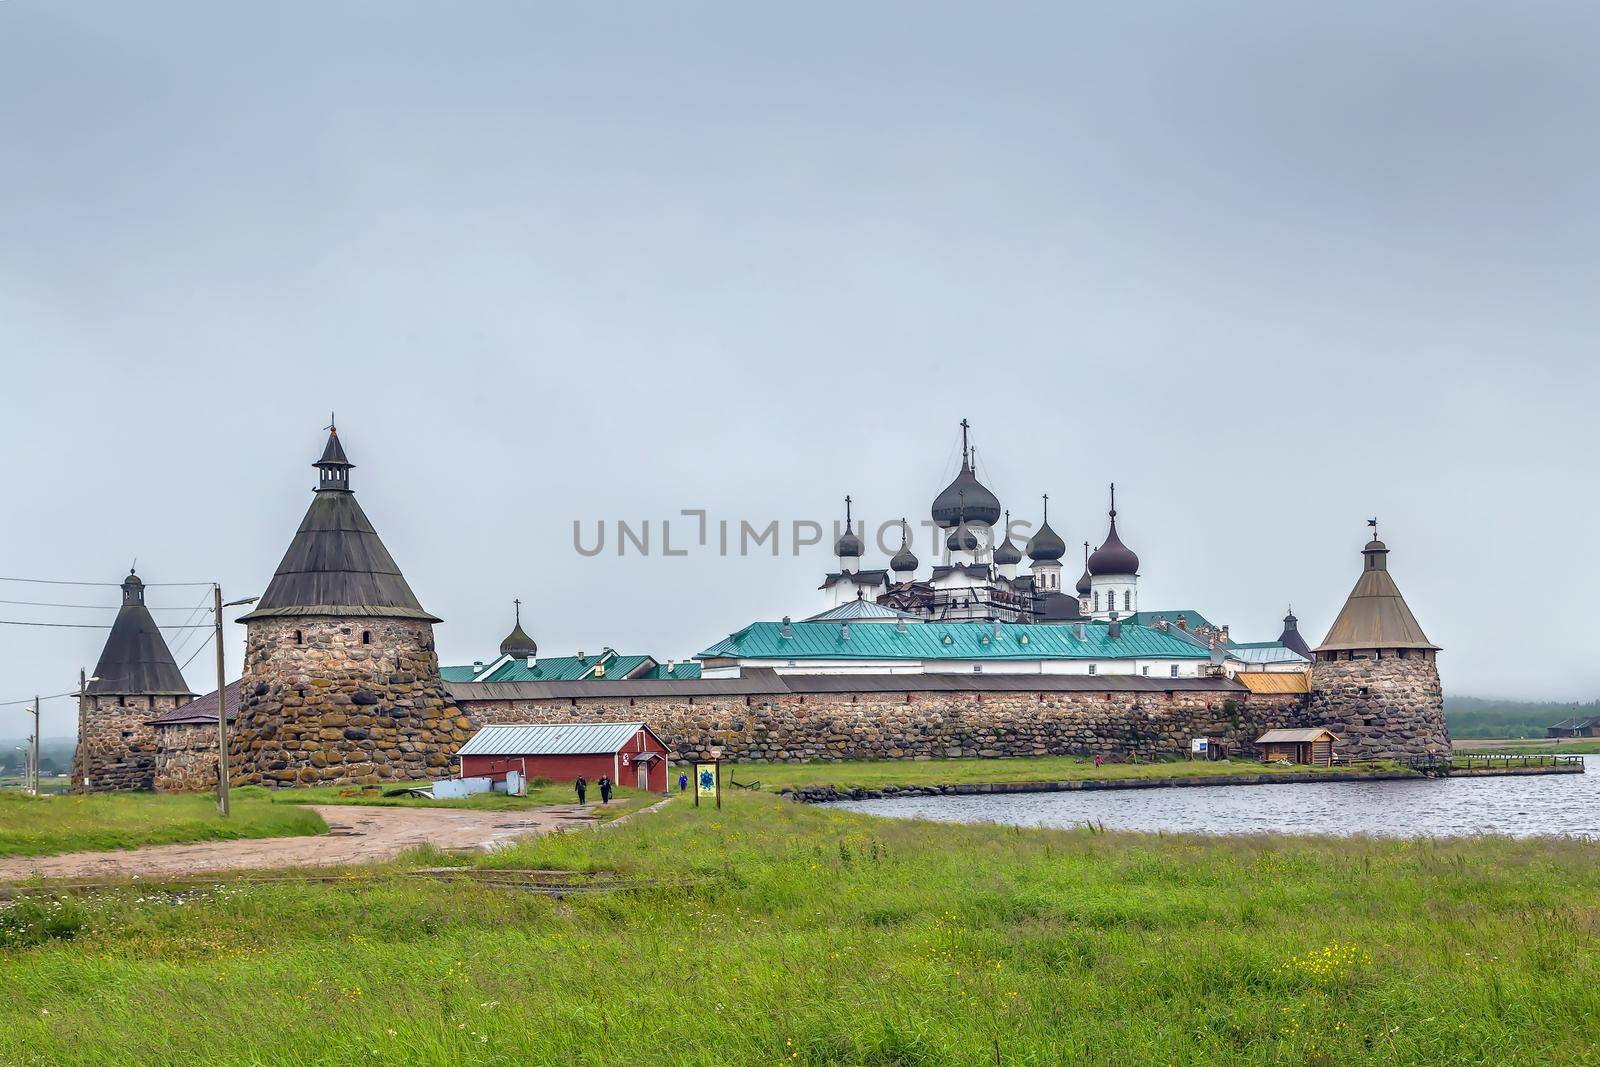 Solovetsky Monastery is a fortified monastery located on the Solovetsky Islands in the White Sea, Russia. View from Holy lake